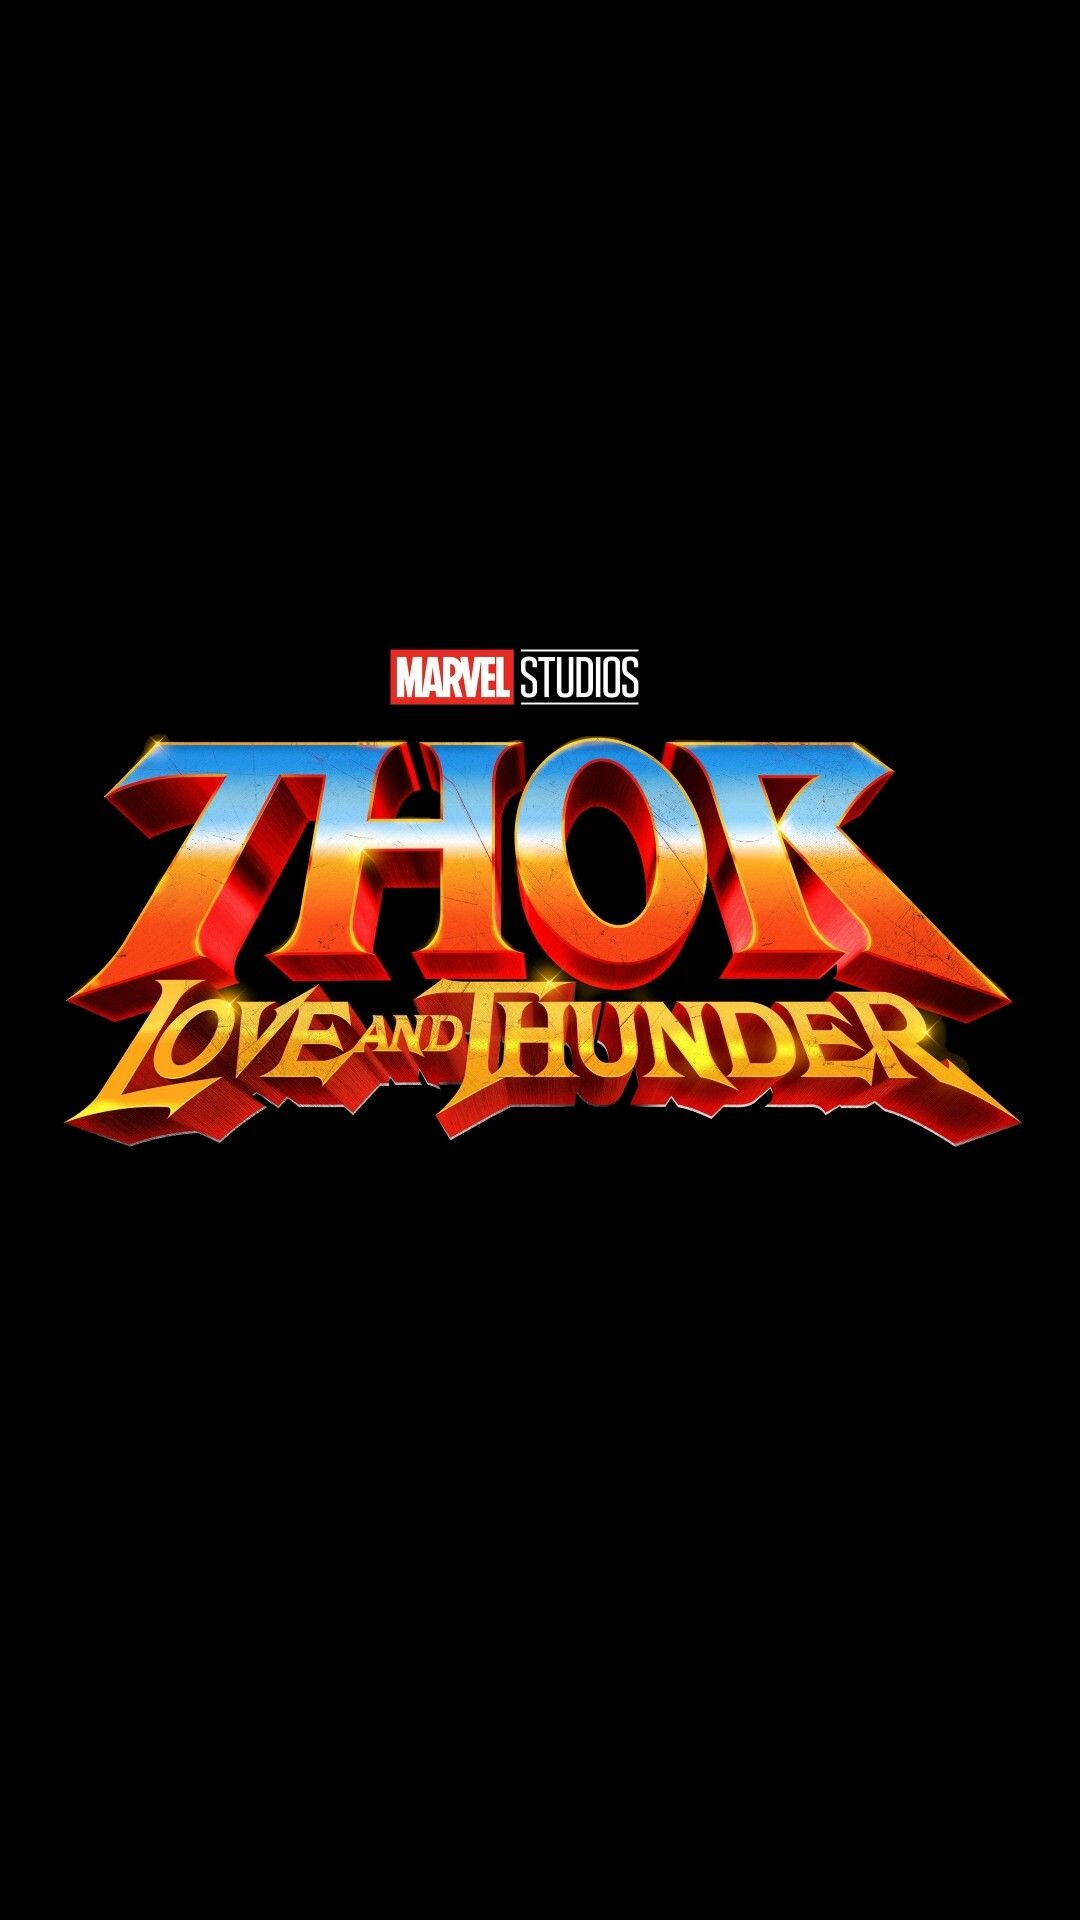 Thor: Love and Thunder: Valkyrie, Korg, Gorr the God Butcher, Fictional characters, MCU. 1080x1920 Full HD Wallpaper.